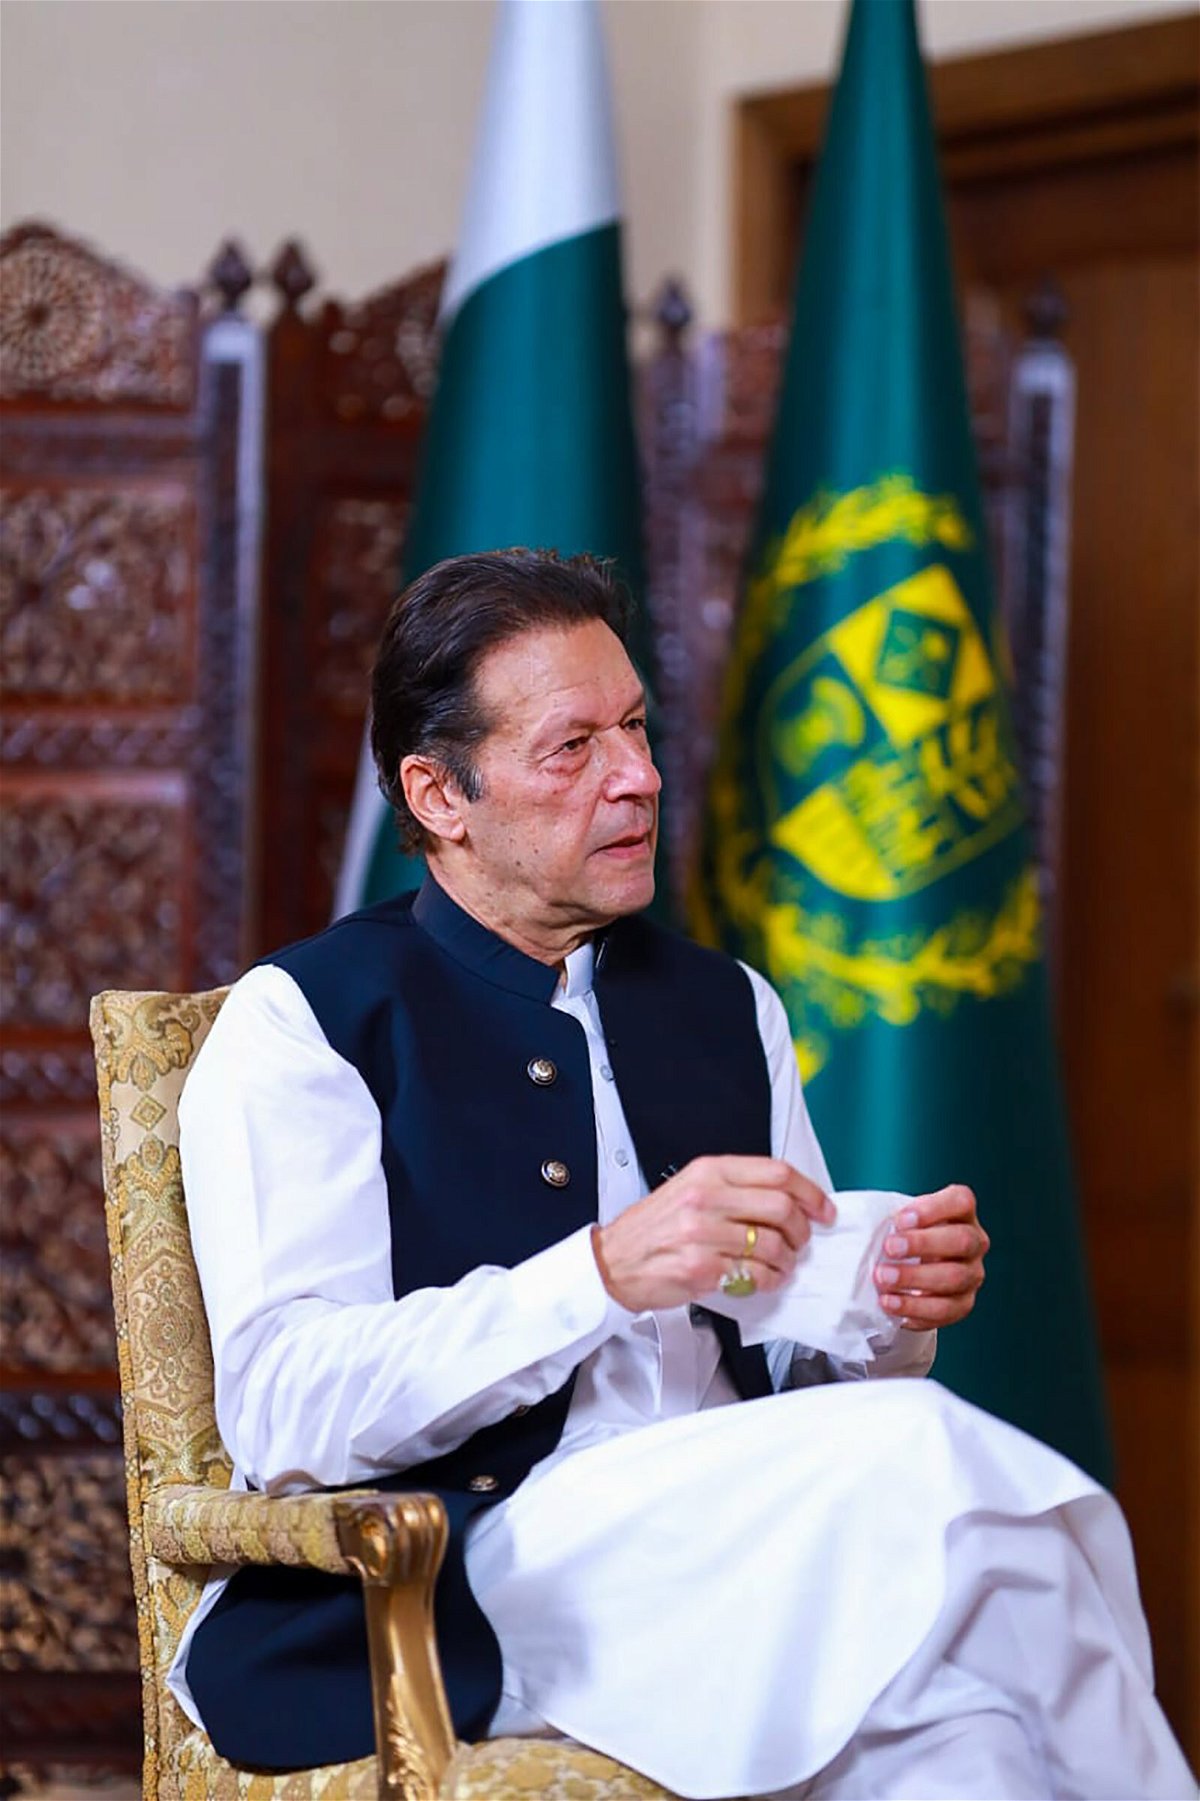 <i>Handout/Pakistan Prime Minister's Office</i><br/>CNN's Becky Anderson interviews Pakistan's Prime Minister Imran Khan on Wednesday.